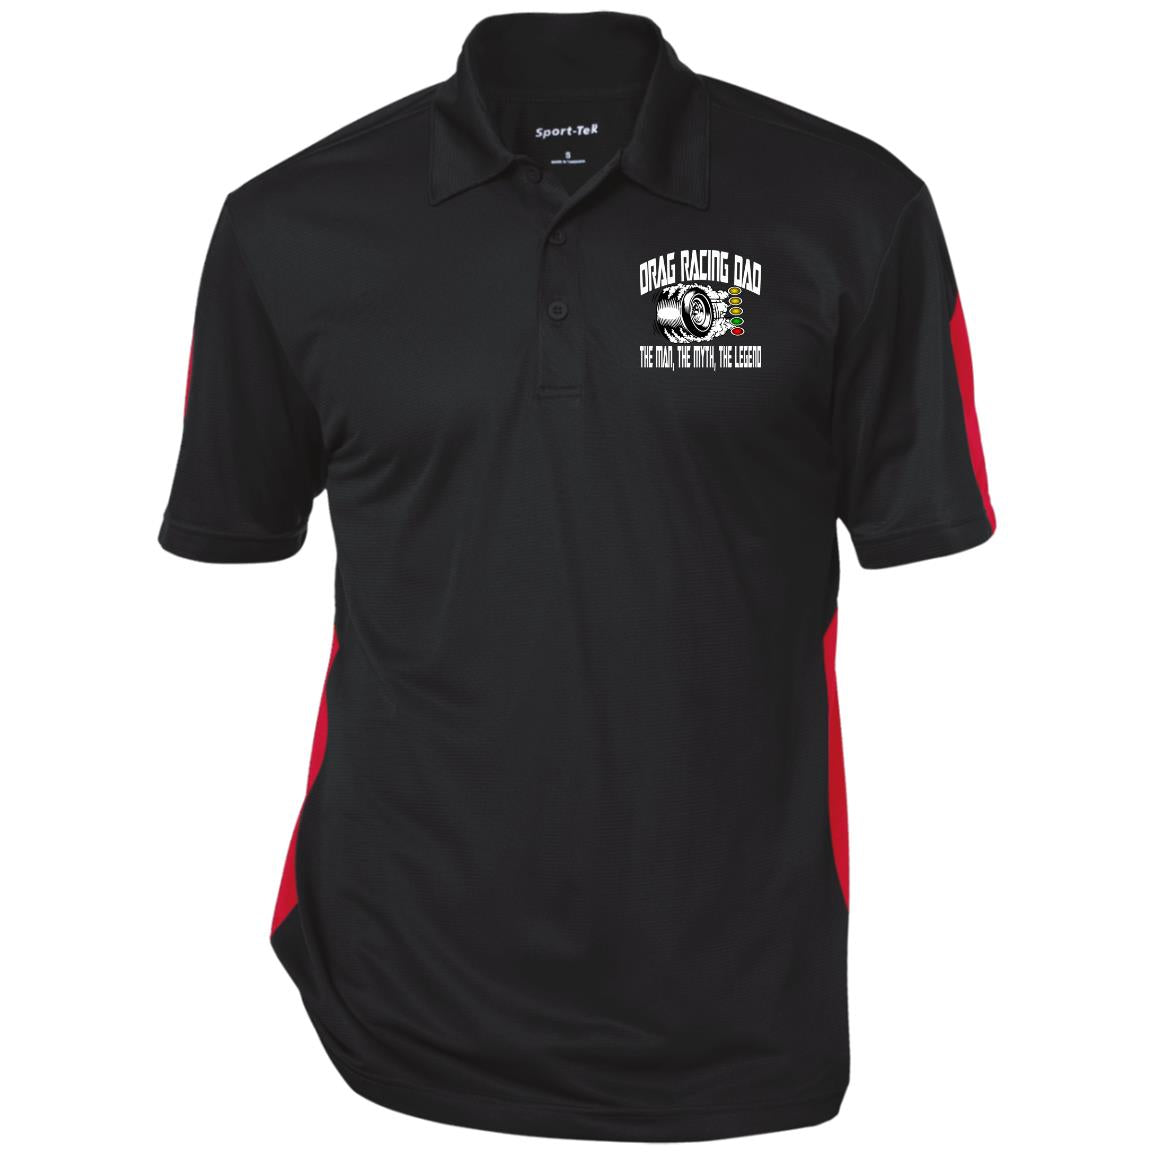 Drag Racing Dad Performance Textured Three-Button Polo